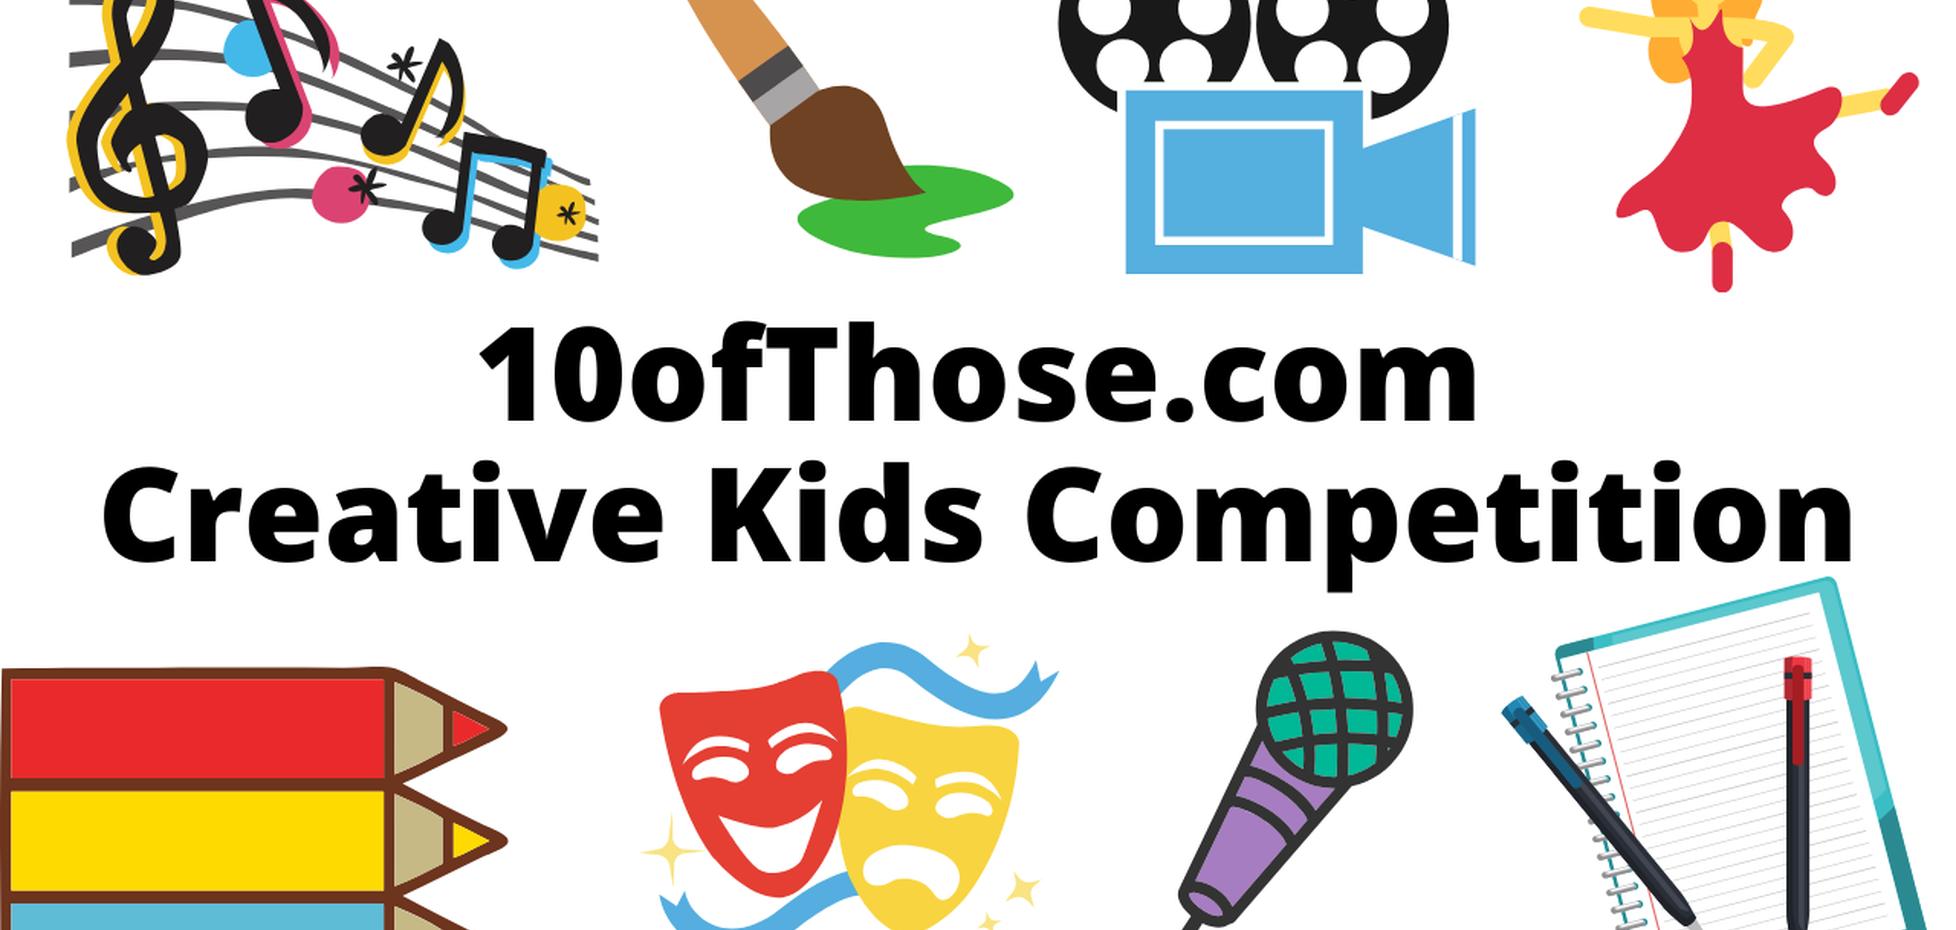 10ofThose Creative Kids Competition